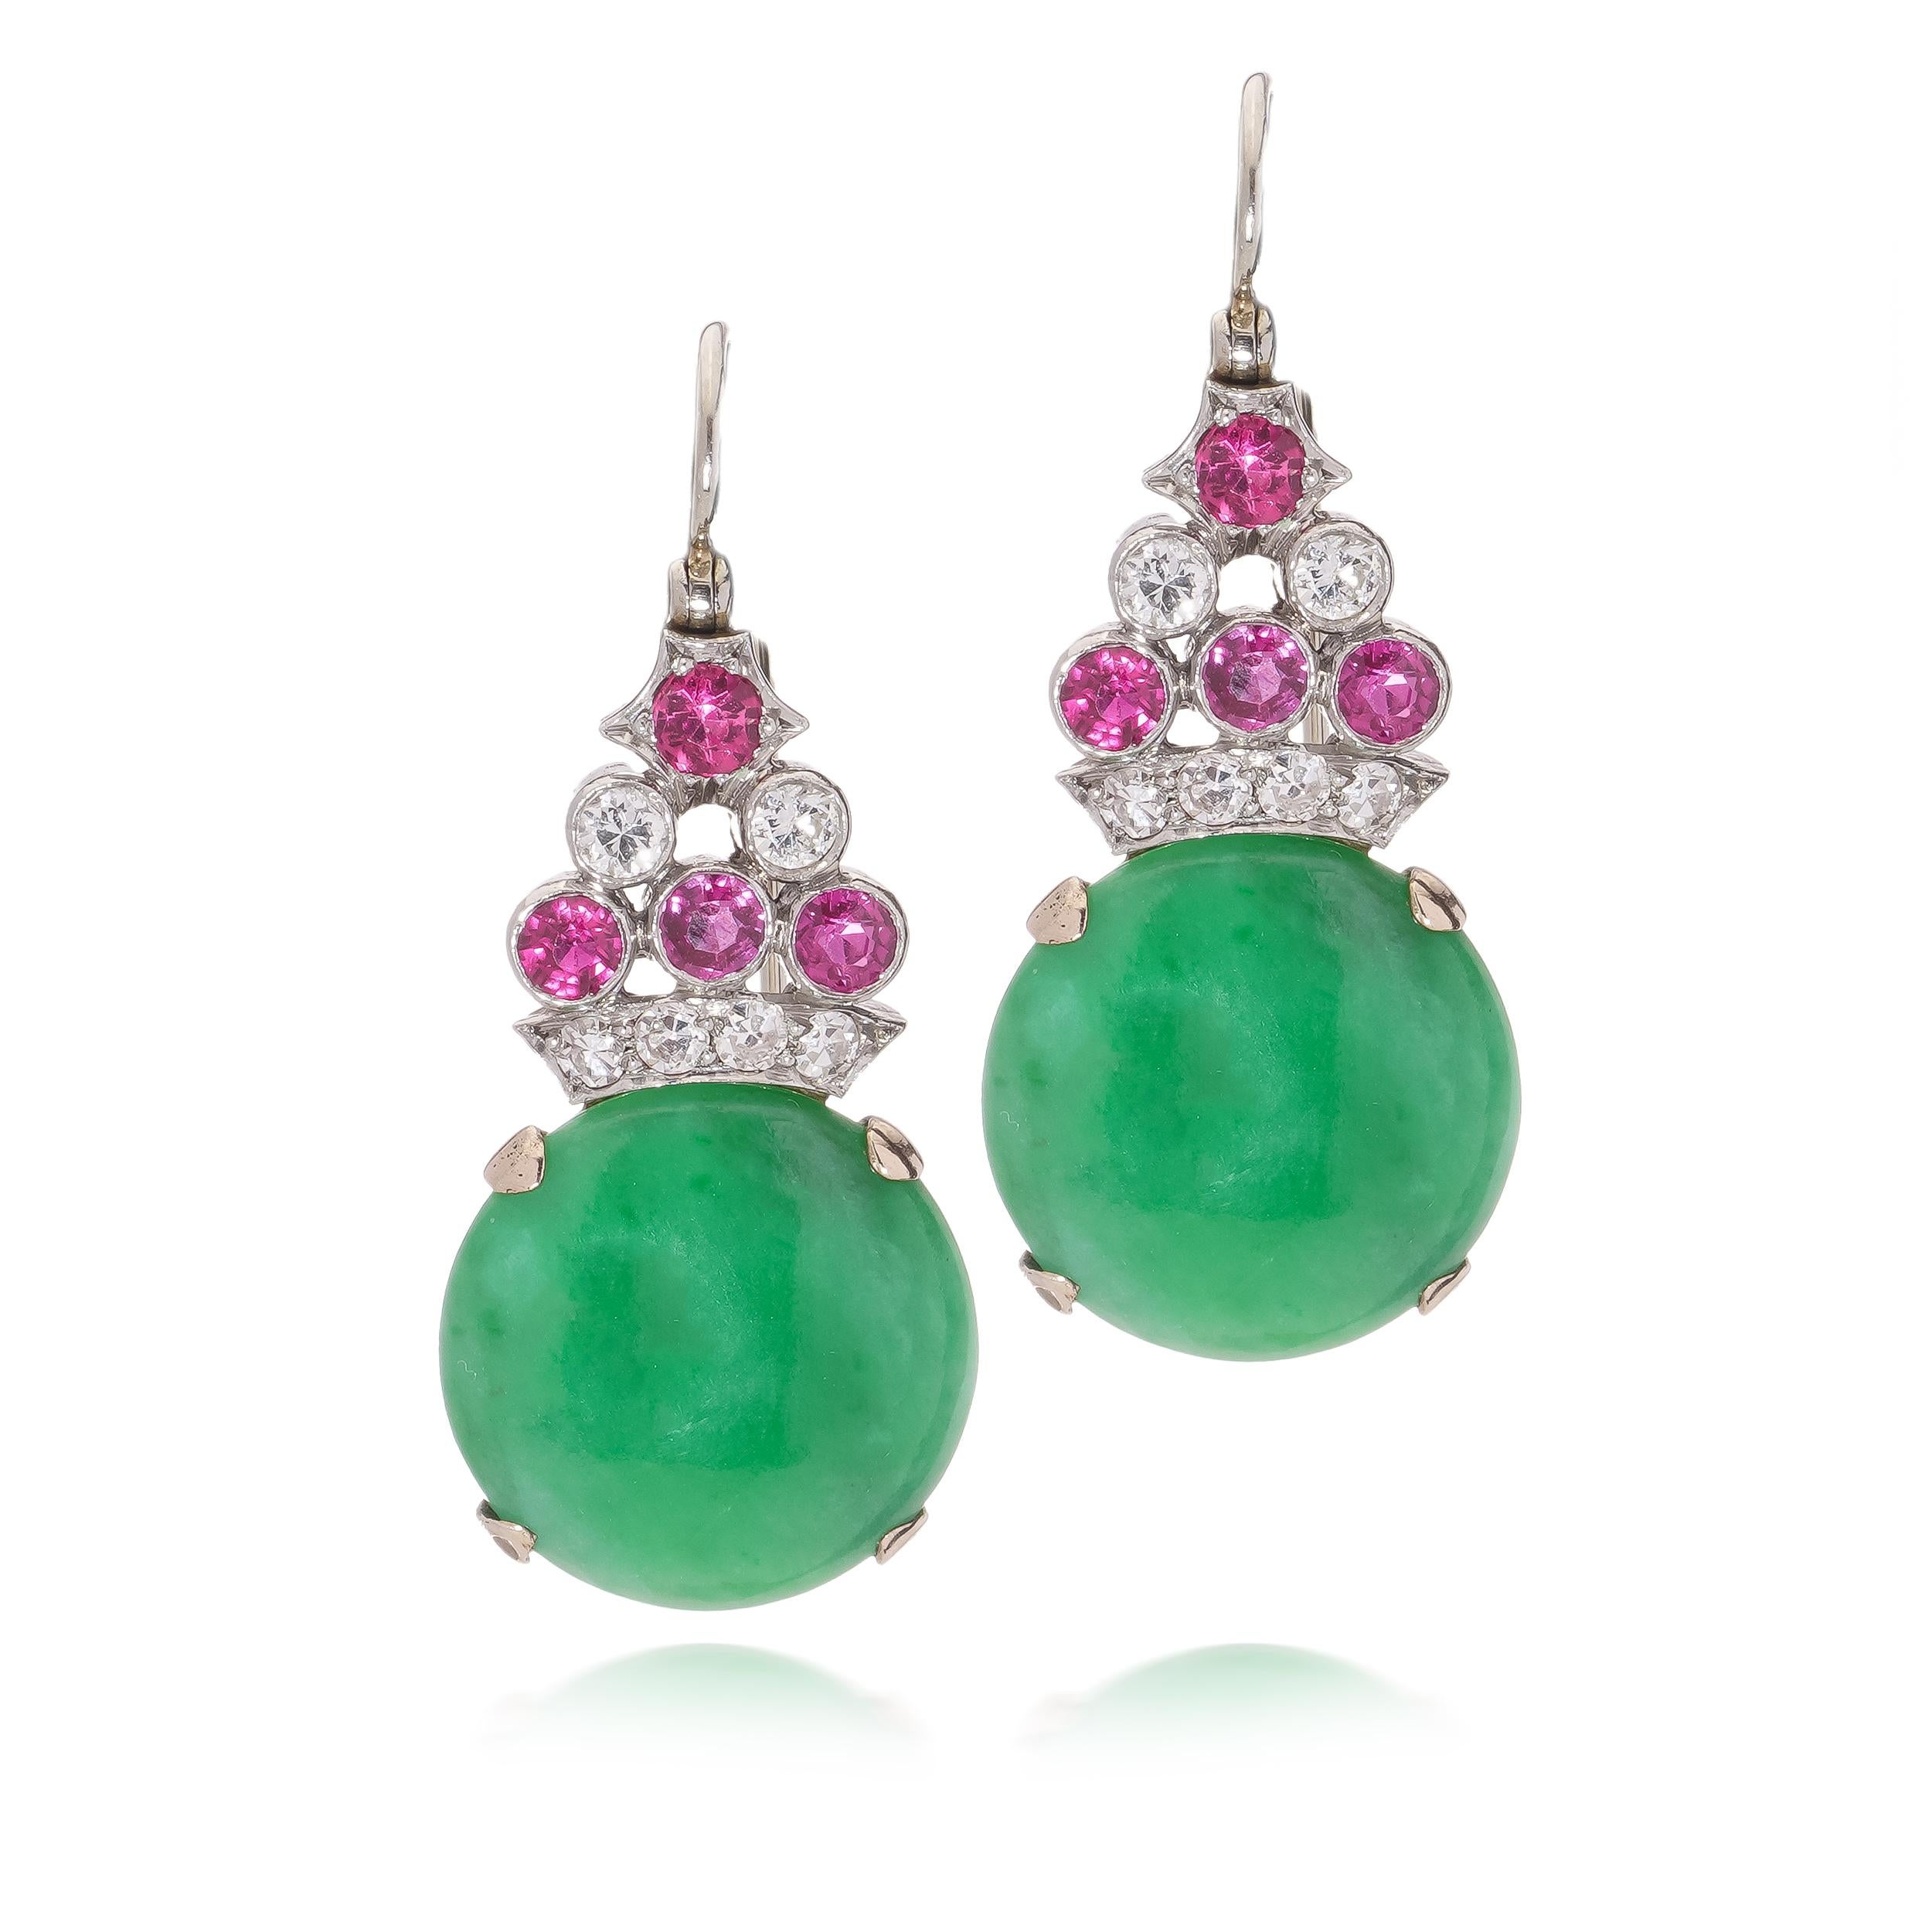 Vintage Platinum and 9kt. gold hook earrings with Jadeite, diamonds, and rubies. 
X-Ray has been tested positive for platinum and 9kt. gold. 

Dimensions:
Length x width x depth: 3.2 x 1.5 x 1.2 cm
Weight: 6.61 grams 

Jadeite -Quantity of